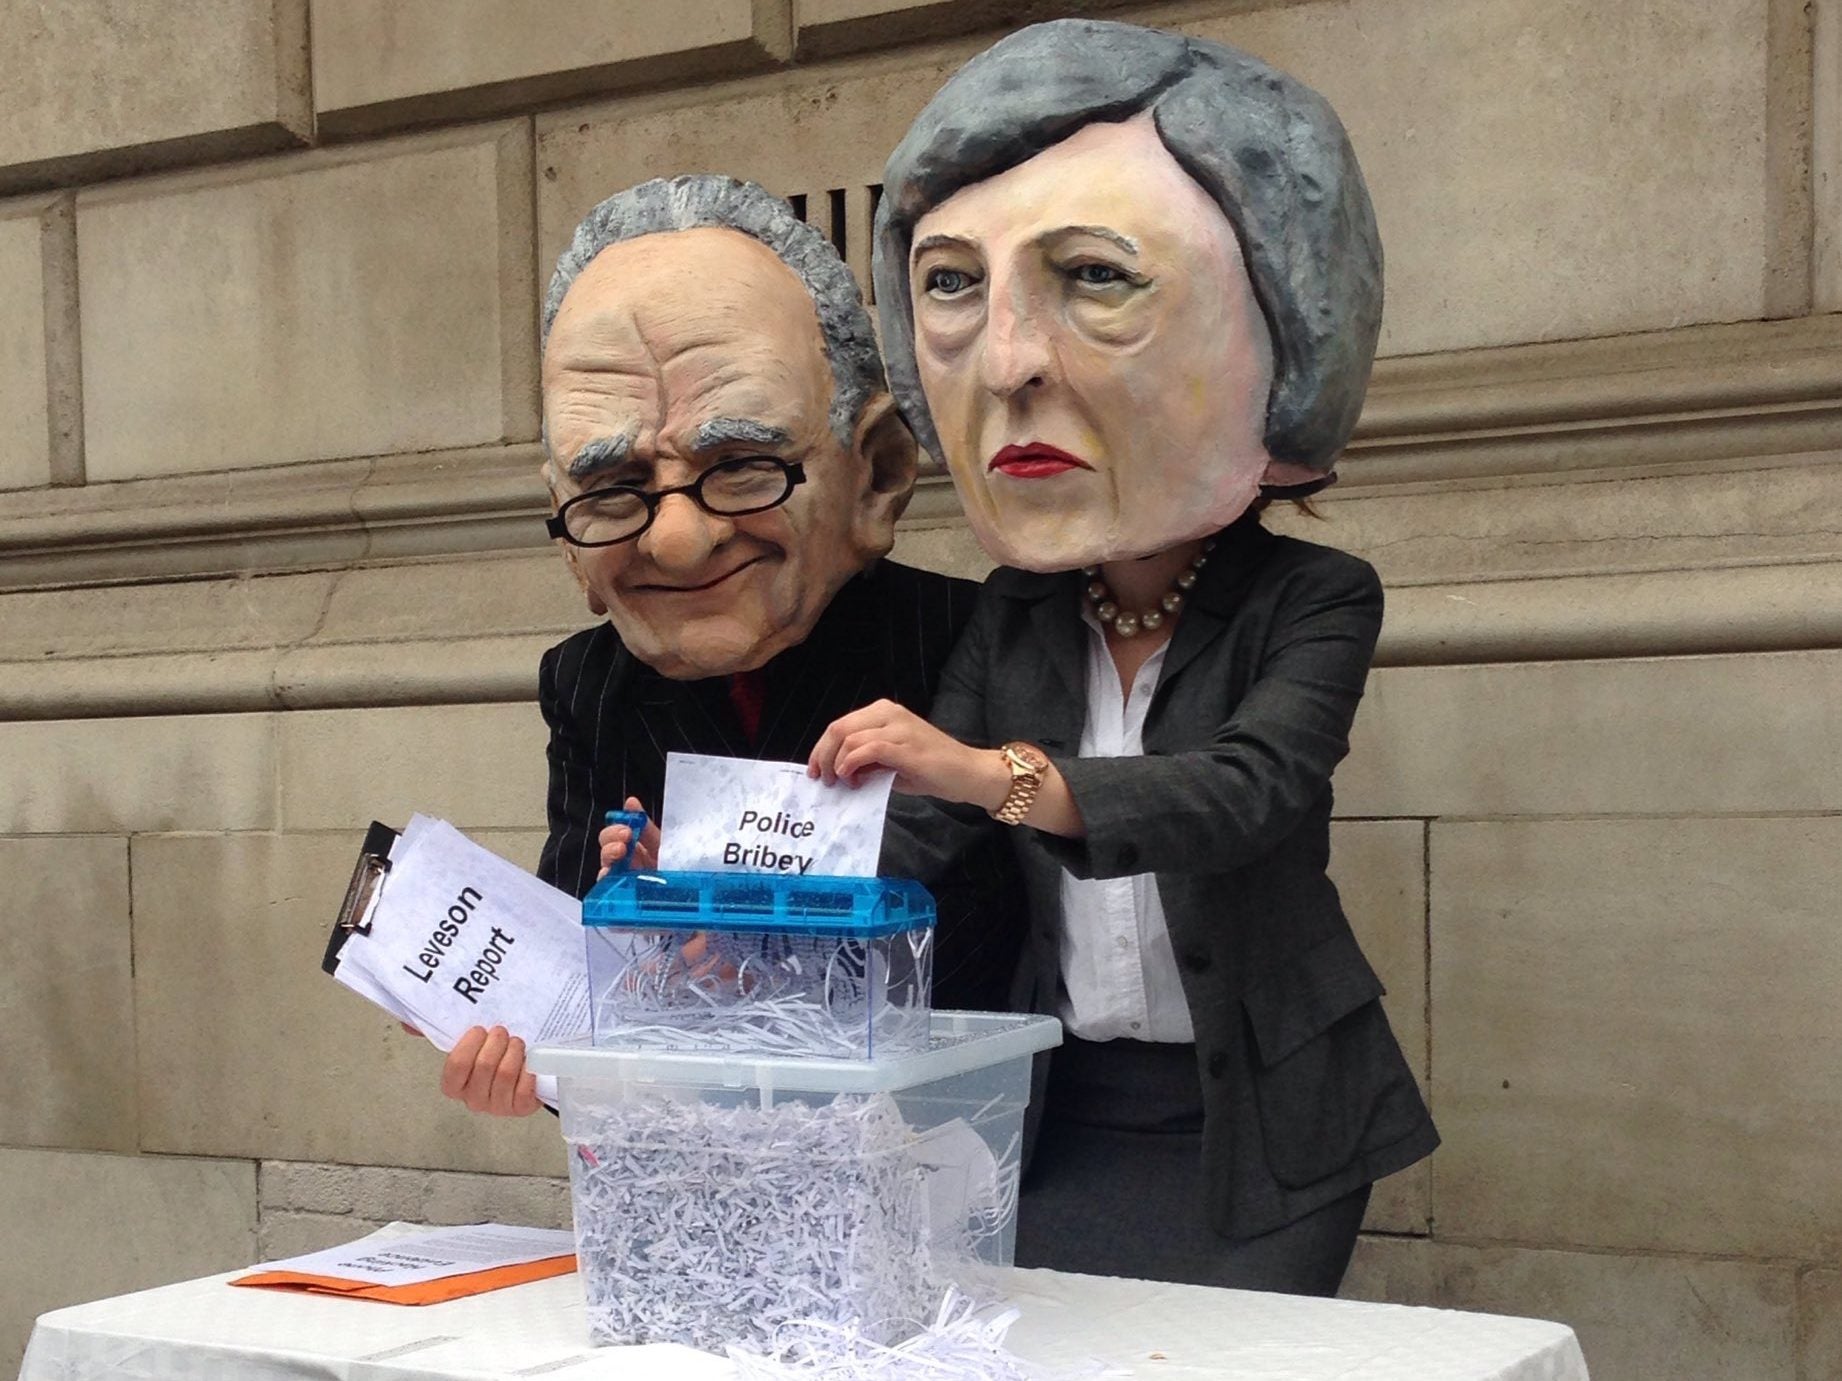 Campaigners deliver 52,000 pages of evidence to DCMS as they demand Section 40 and Leveson two